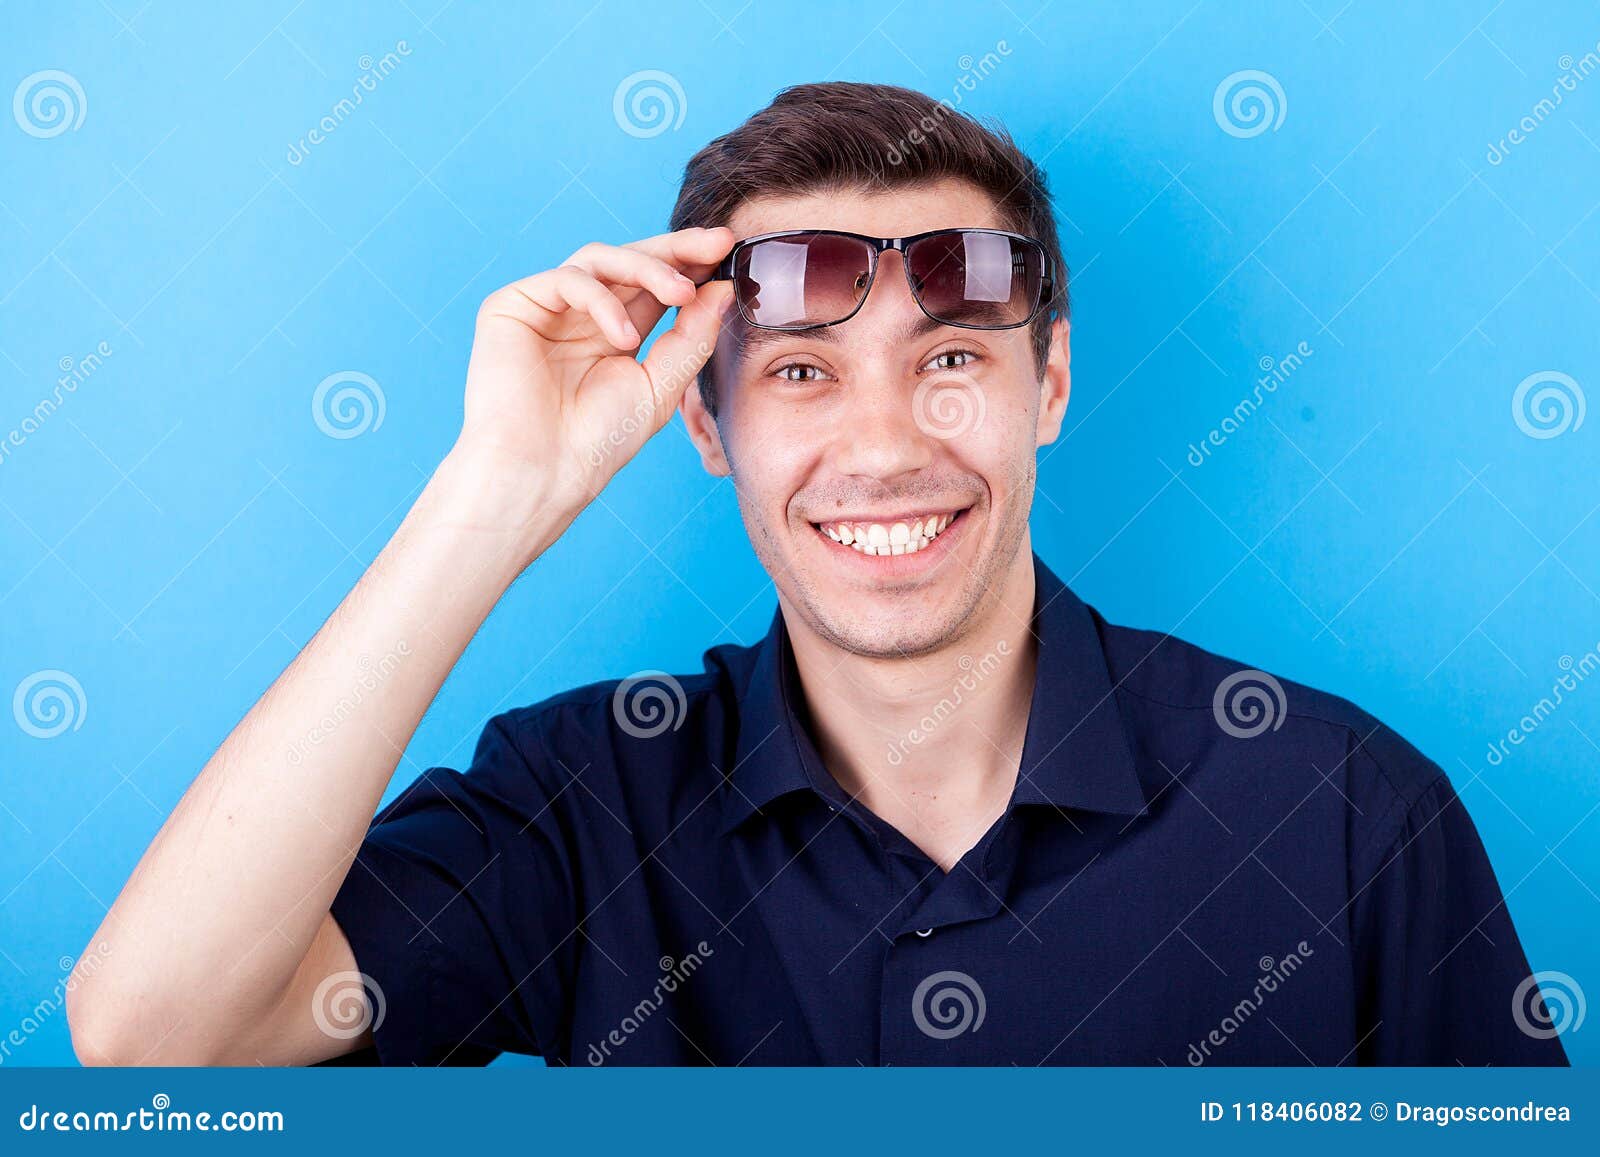 Smiling Young Man Making Silly Faces Stock Photo - Image of caucasian ...